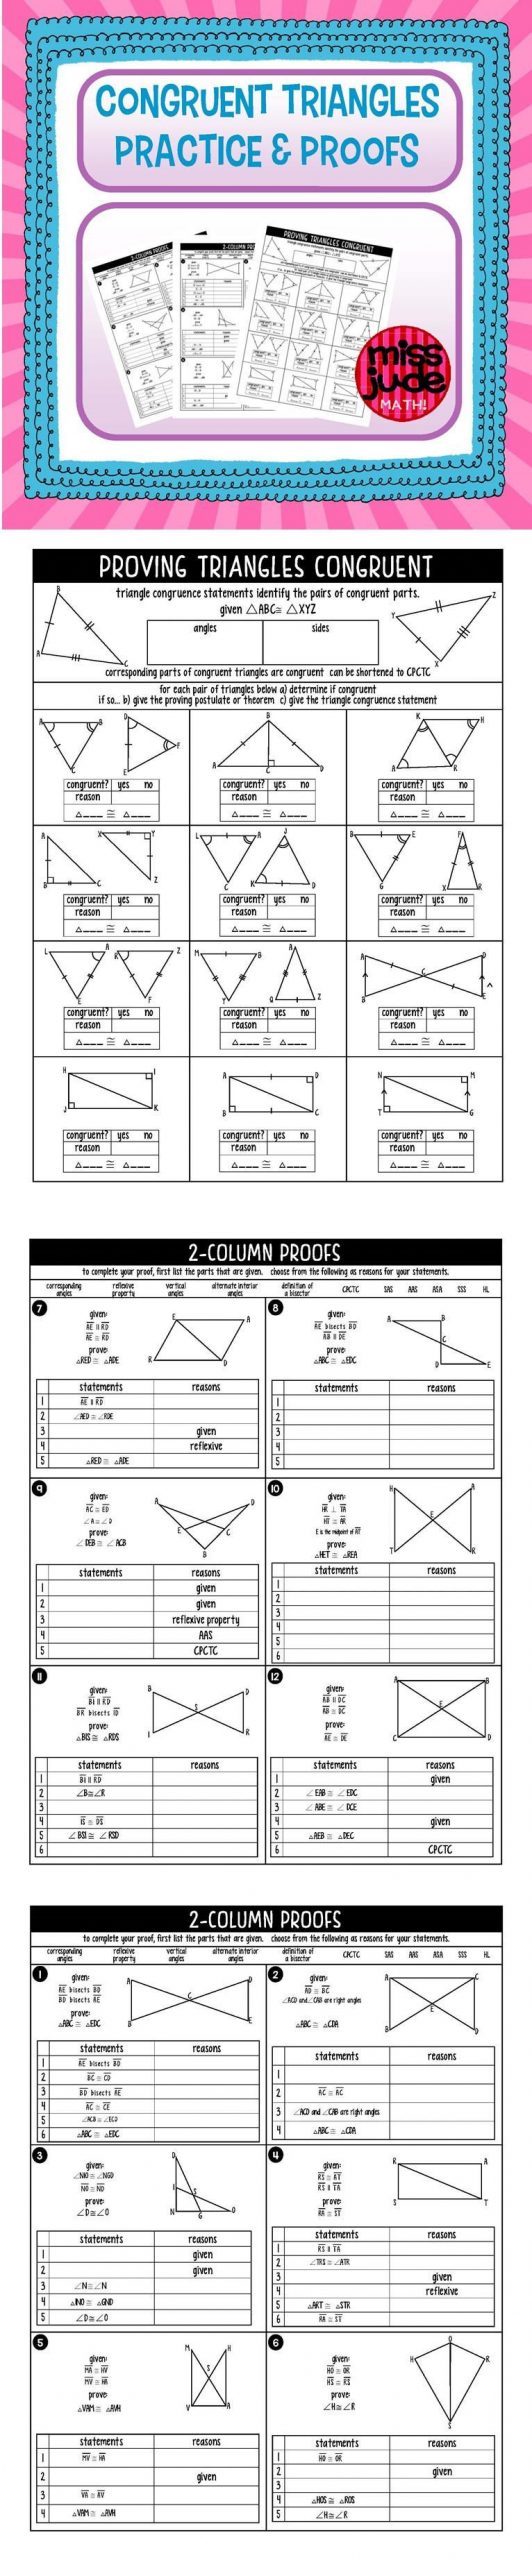 Triangle Congruence Proof Worksheet Congruent Triangles Practice and Proofs Geometry